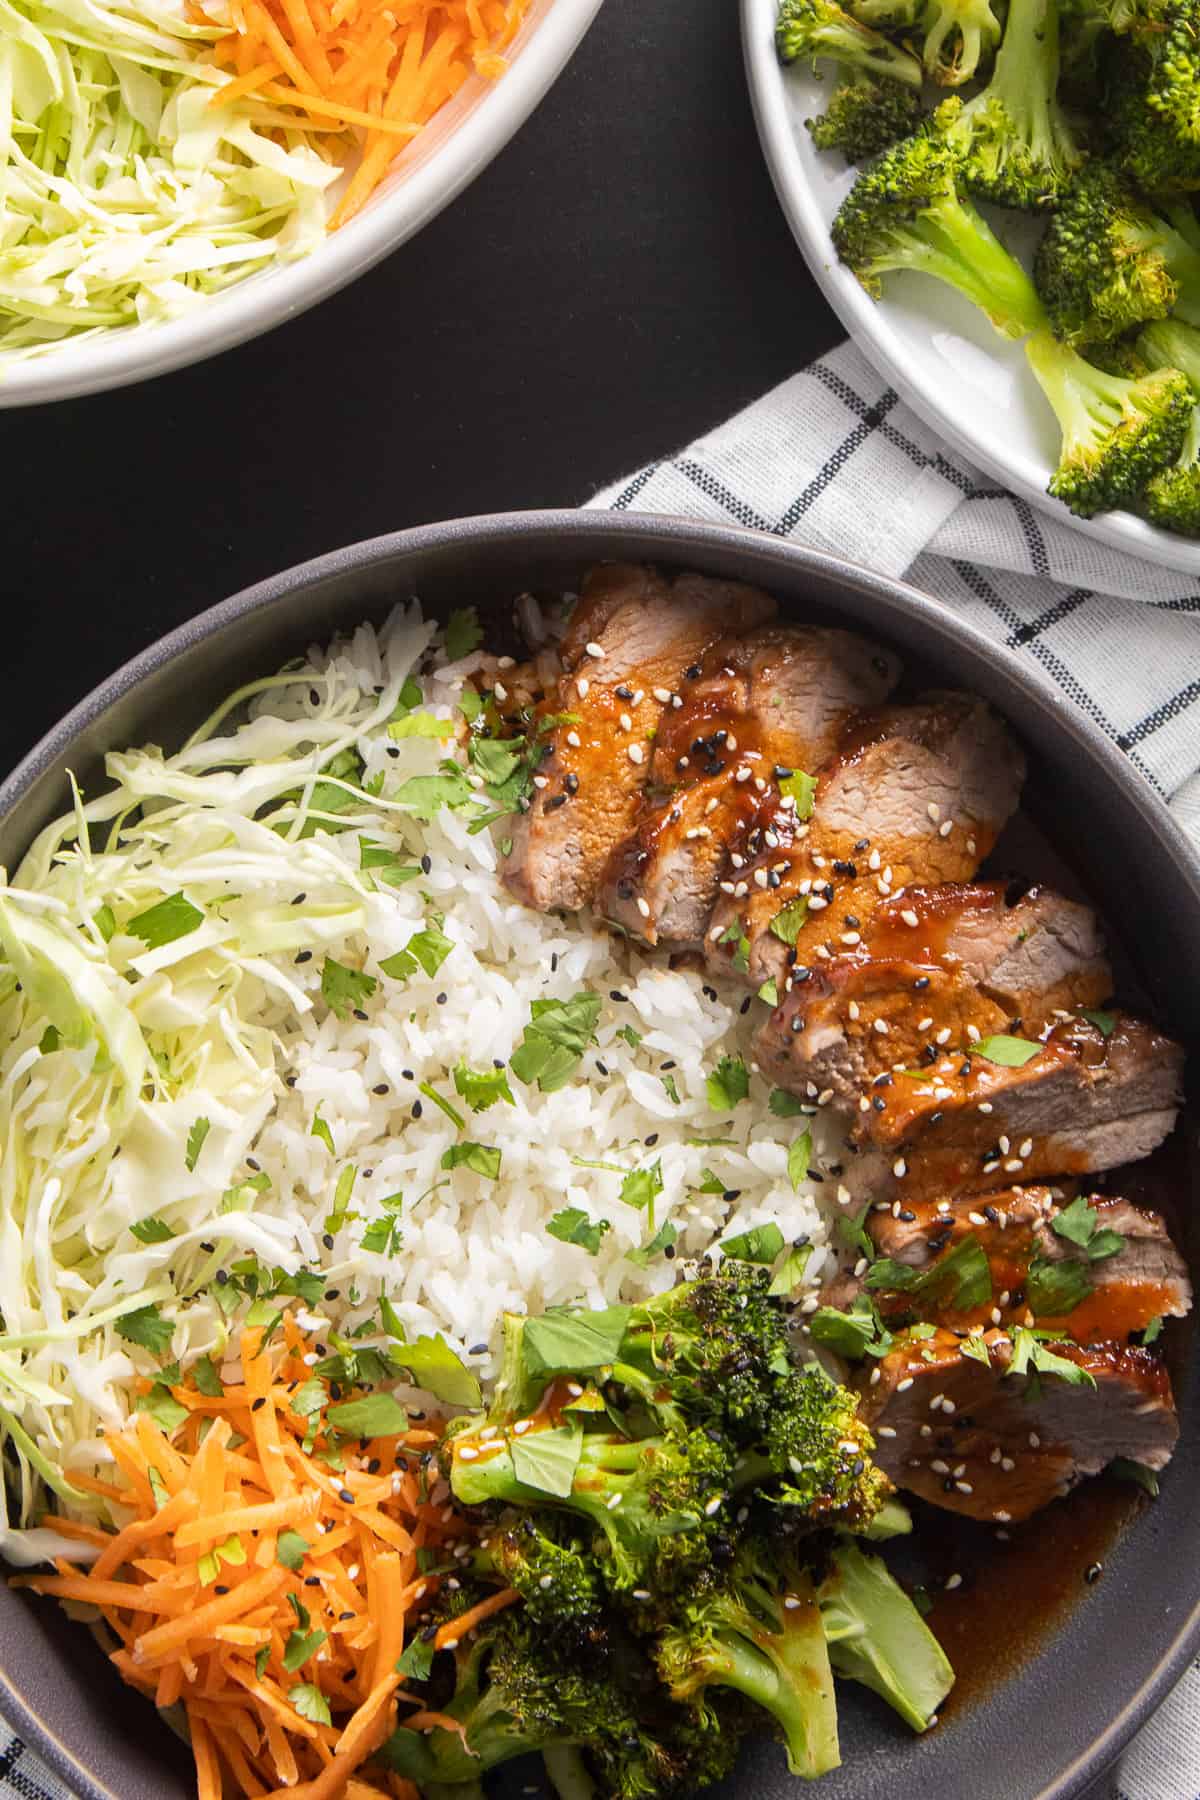 Pork tenderloin slices sit on a bed of rice alongside roasted broccoli, raw carrots, and cabbage and are drizzled with a orange-red sauce and sprinkled with sesame seeds and cilantro.